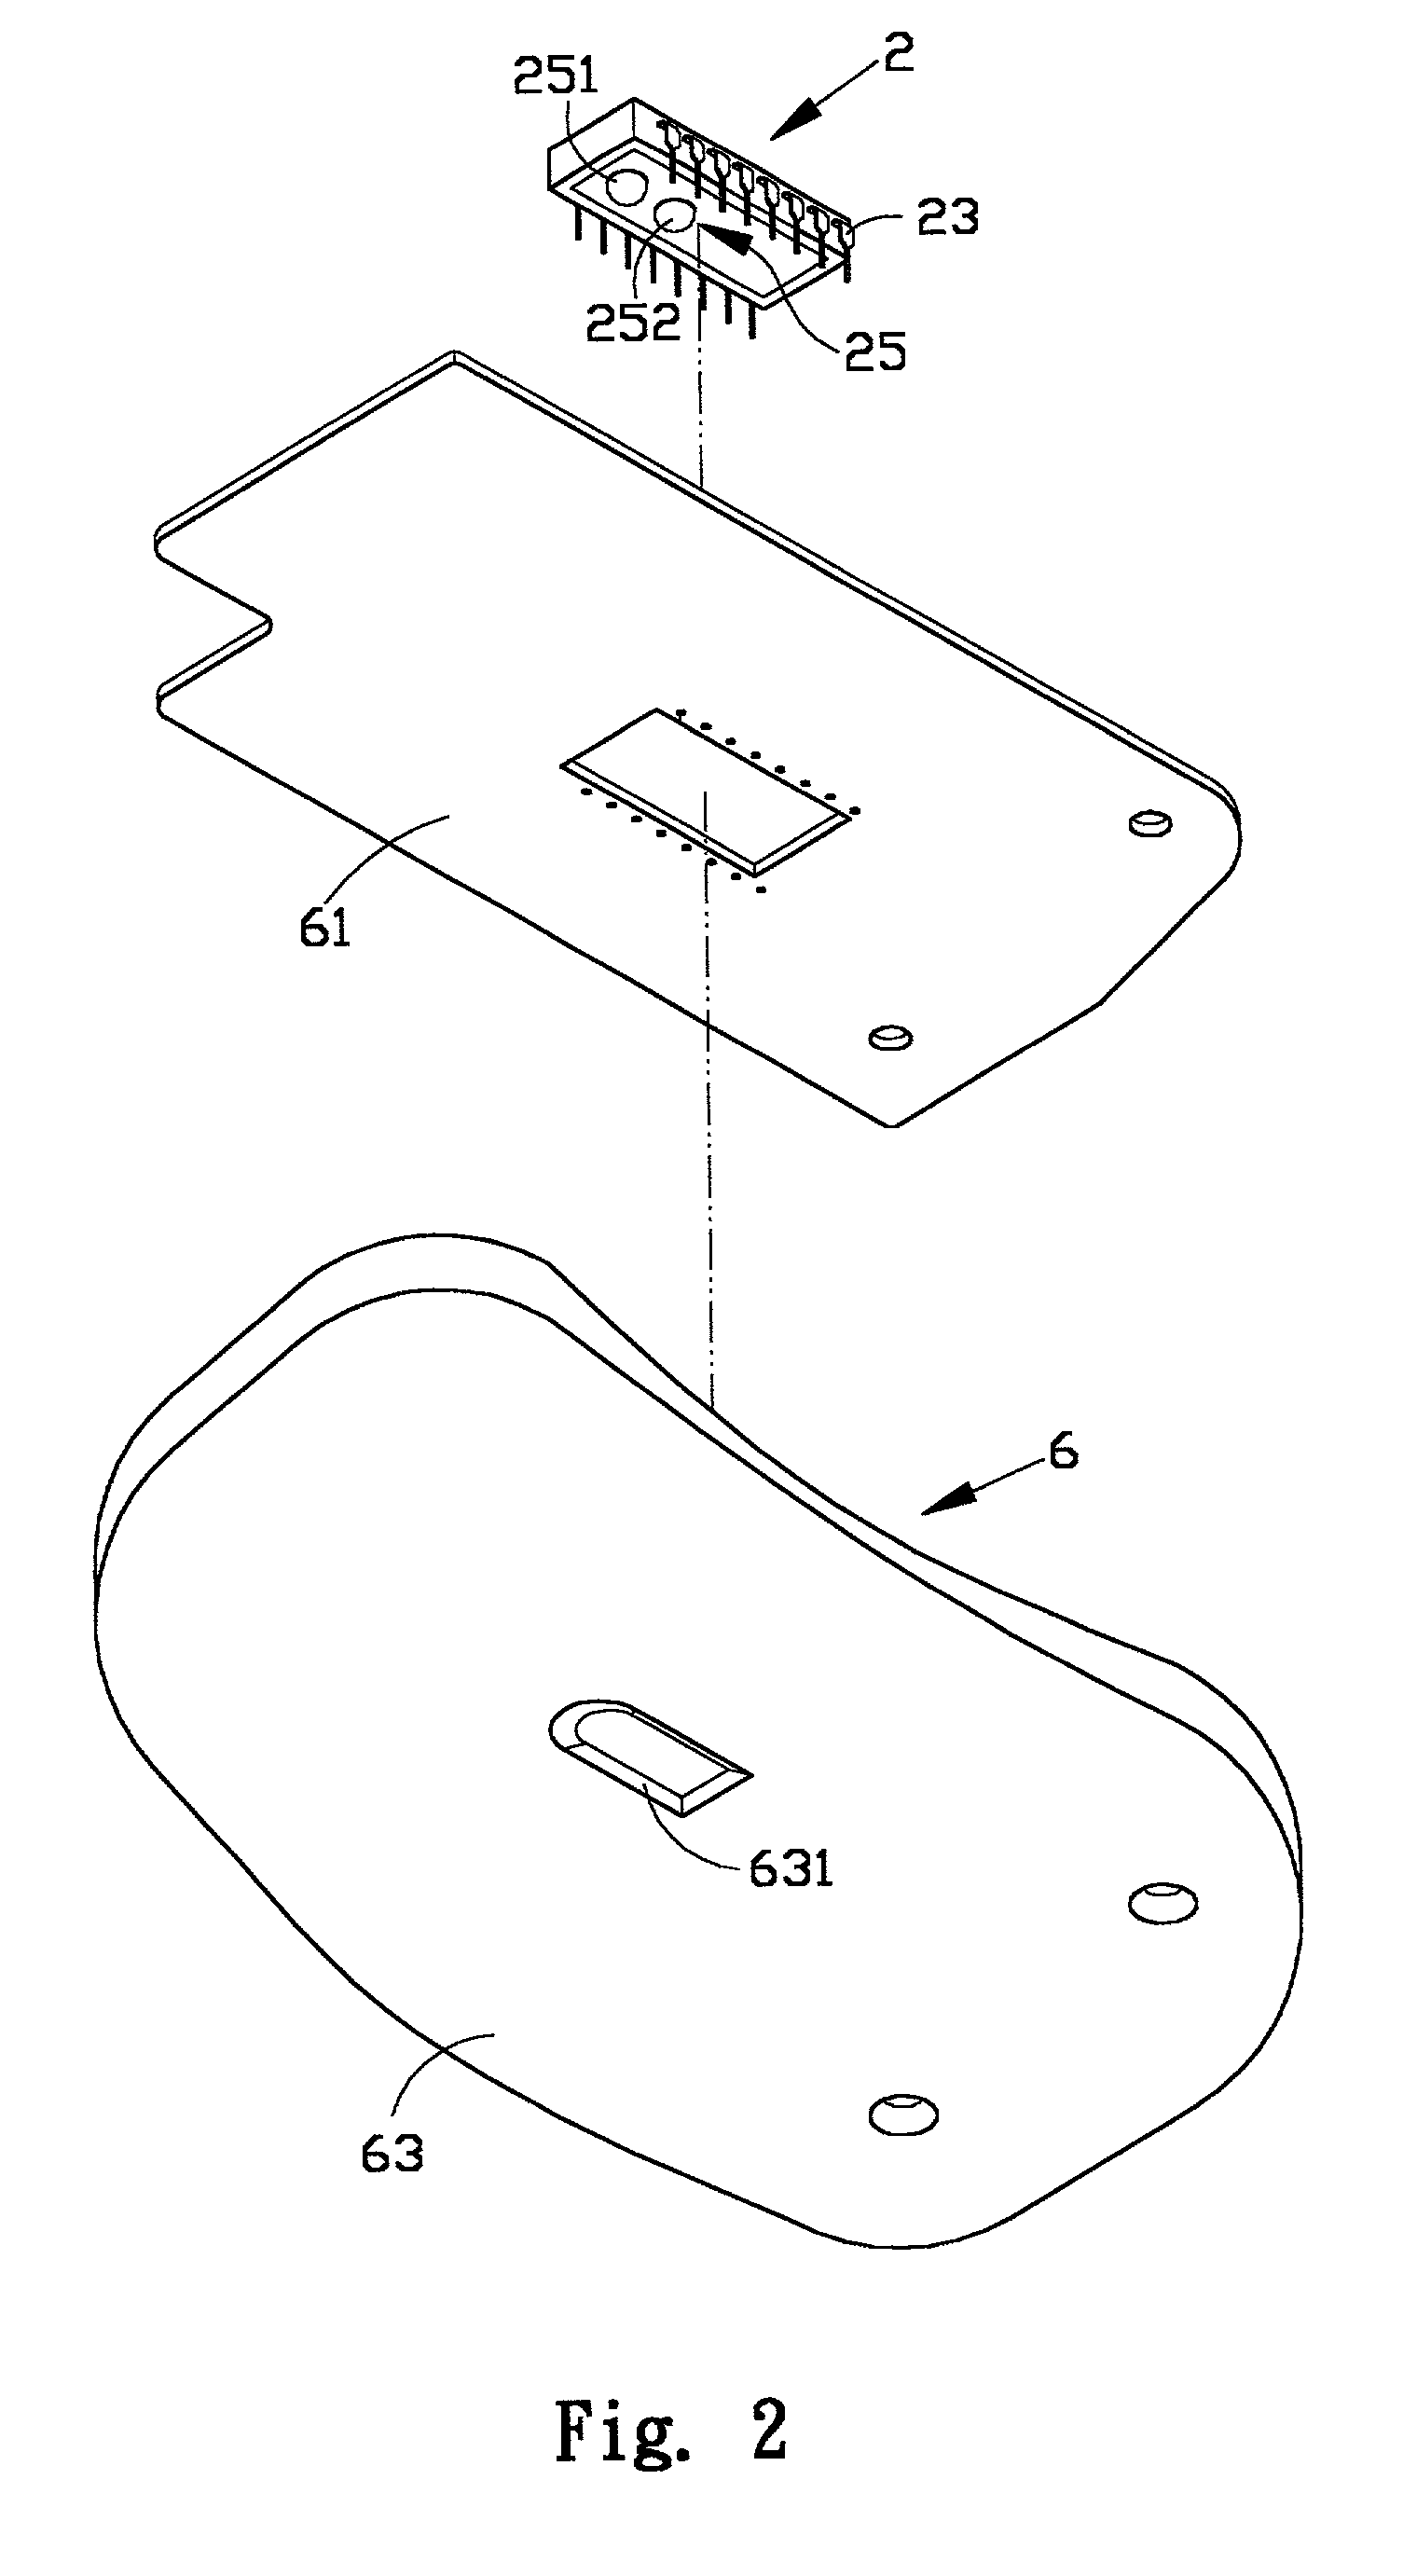 Modulated optical mouse for a personal computer